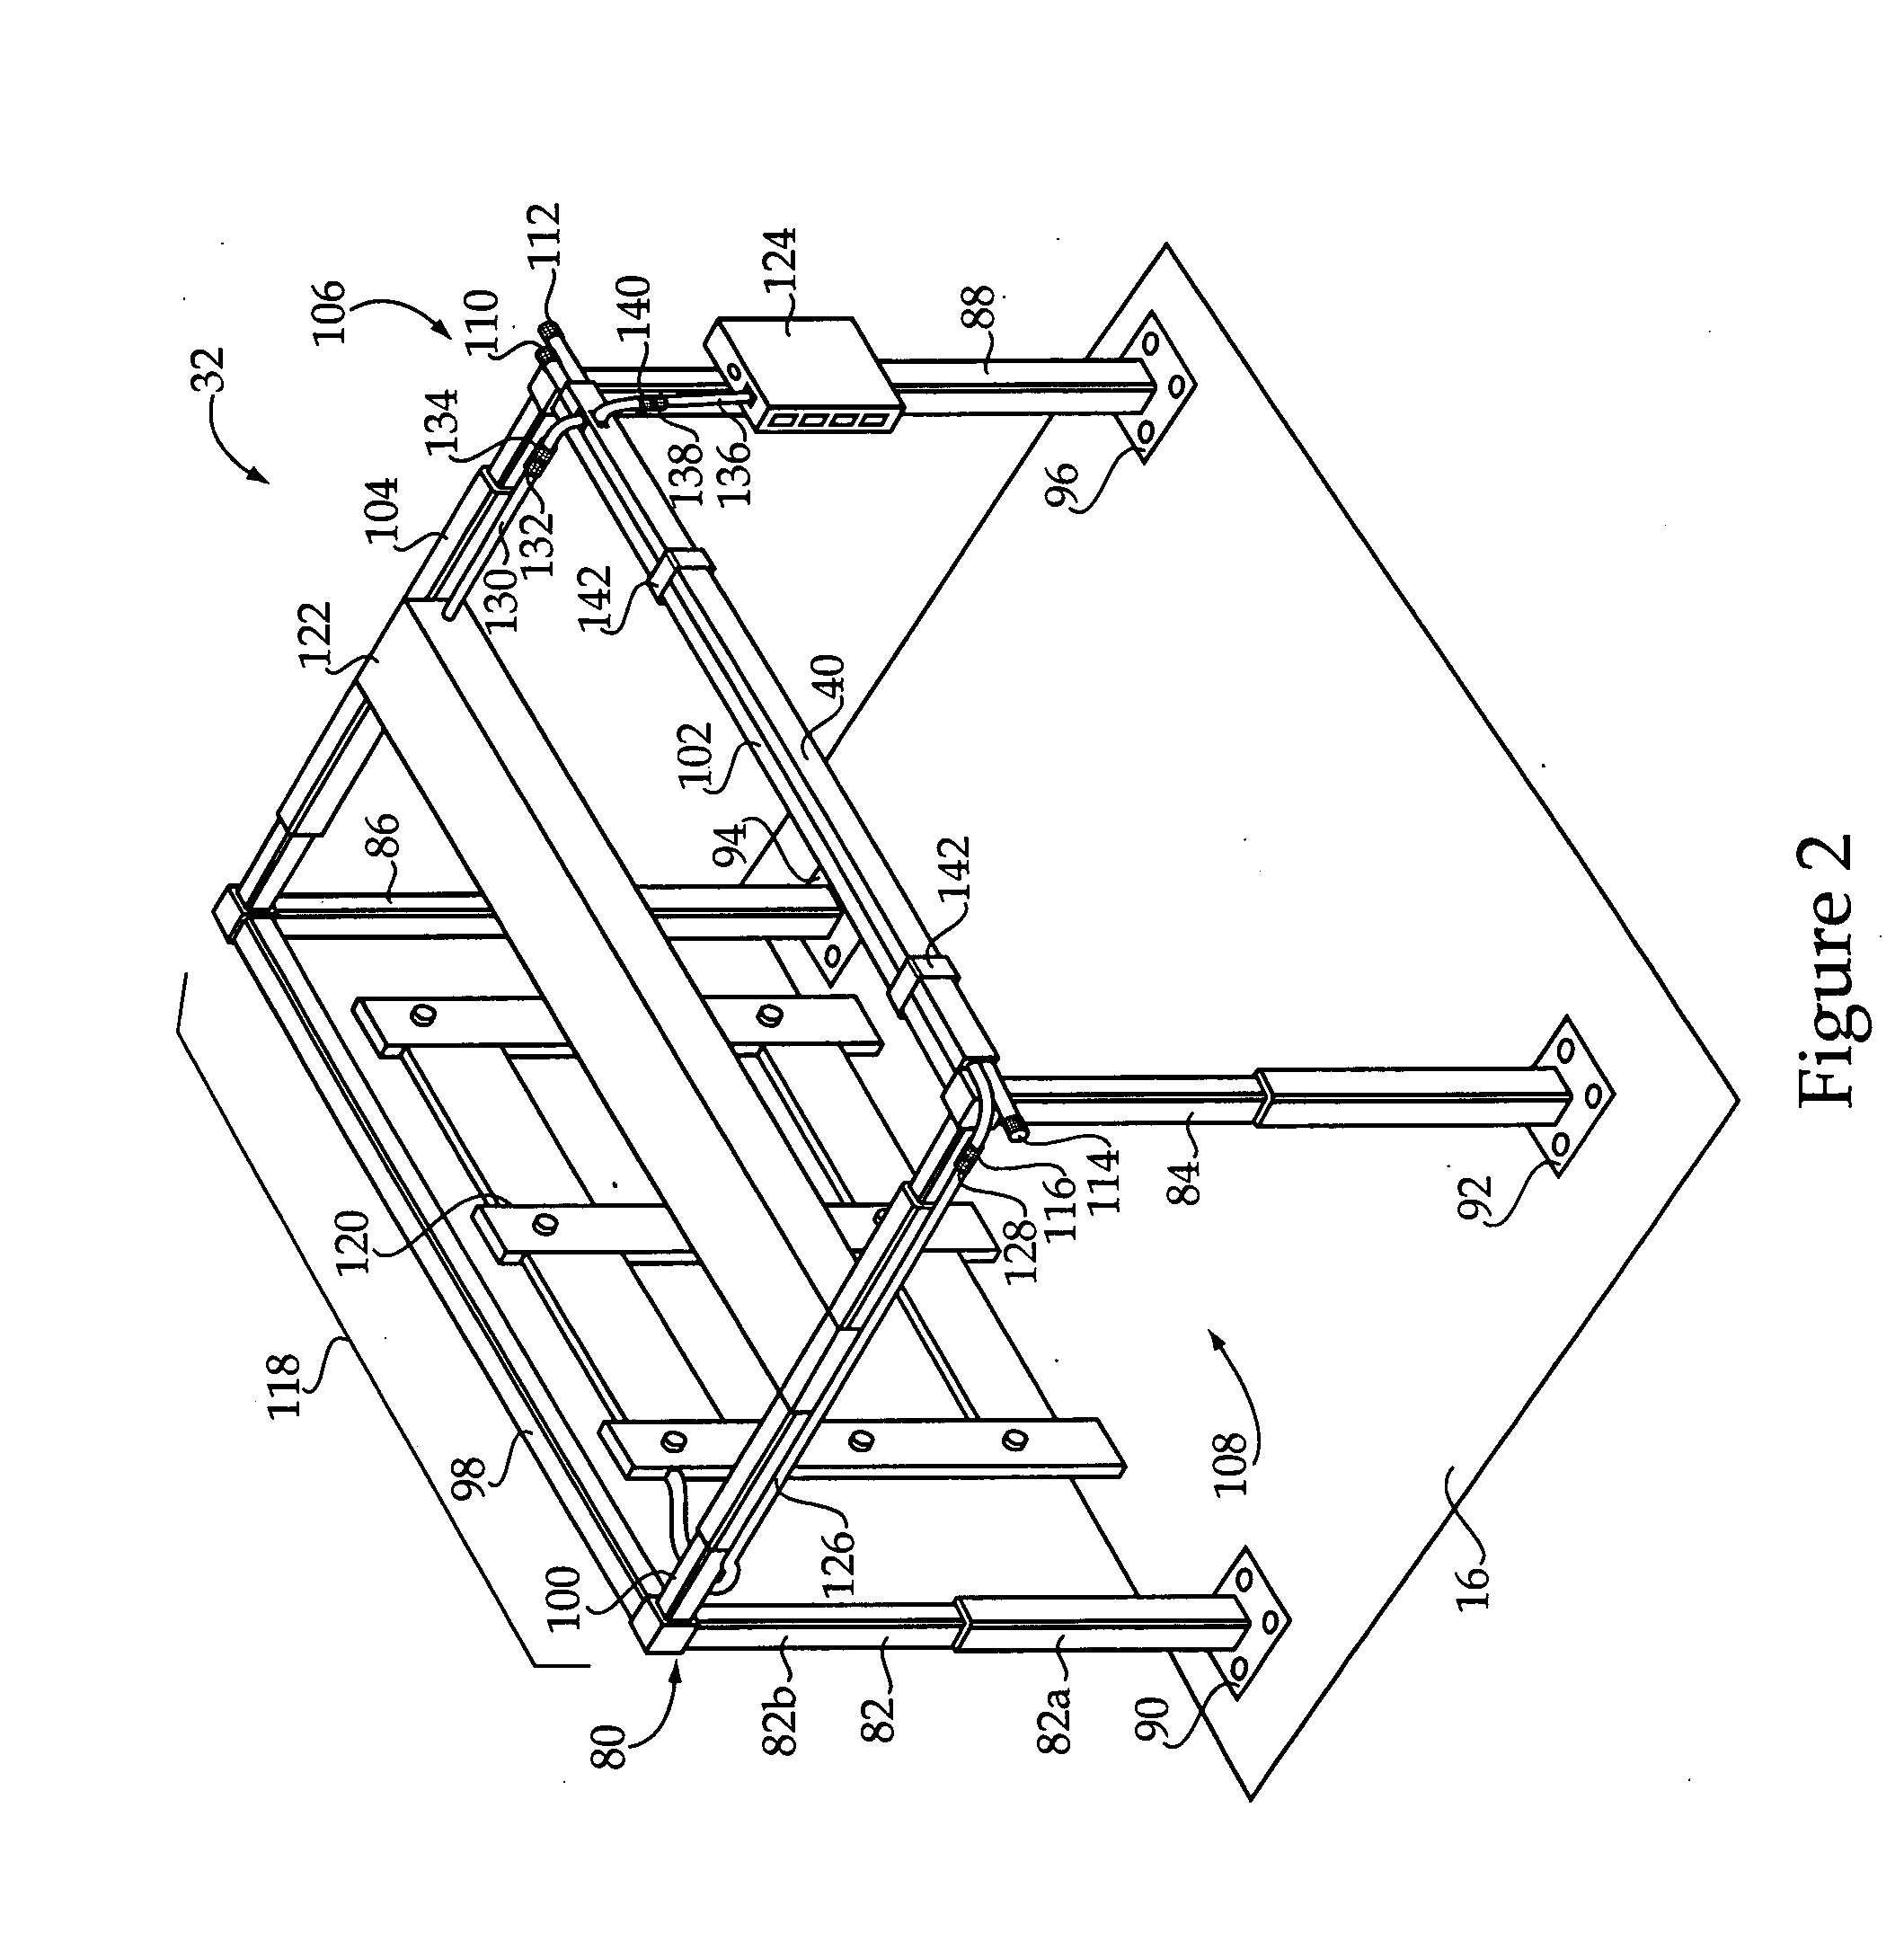 Material handling system including dual track assembly and method of operating same